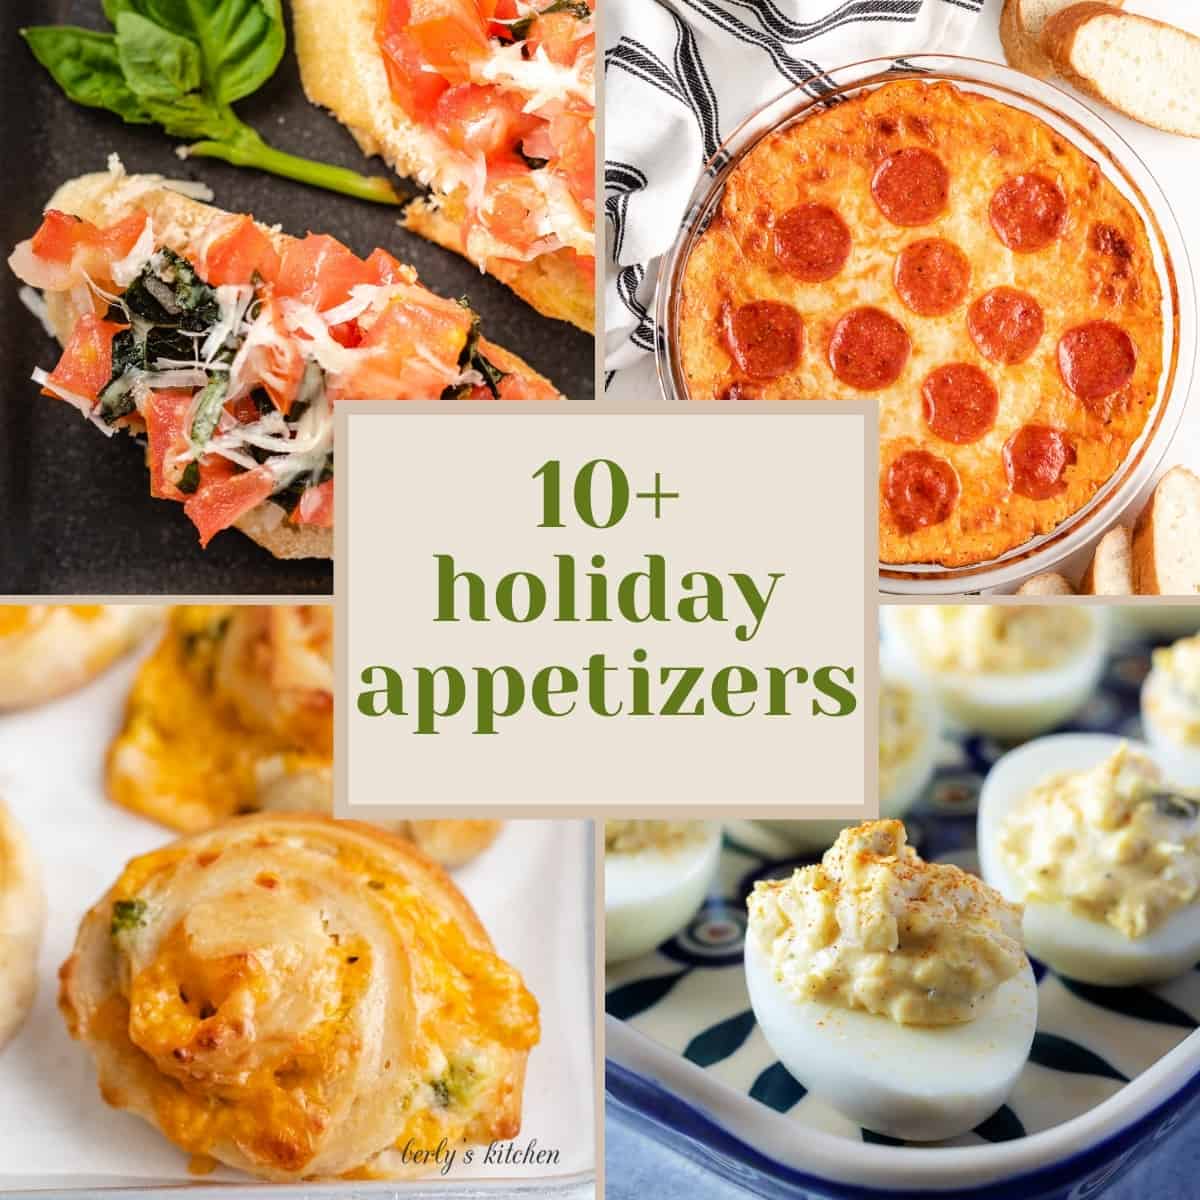 Irresistible holiday appetizers